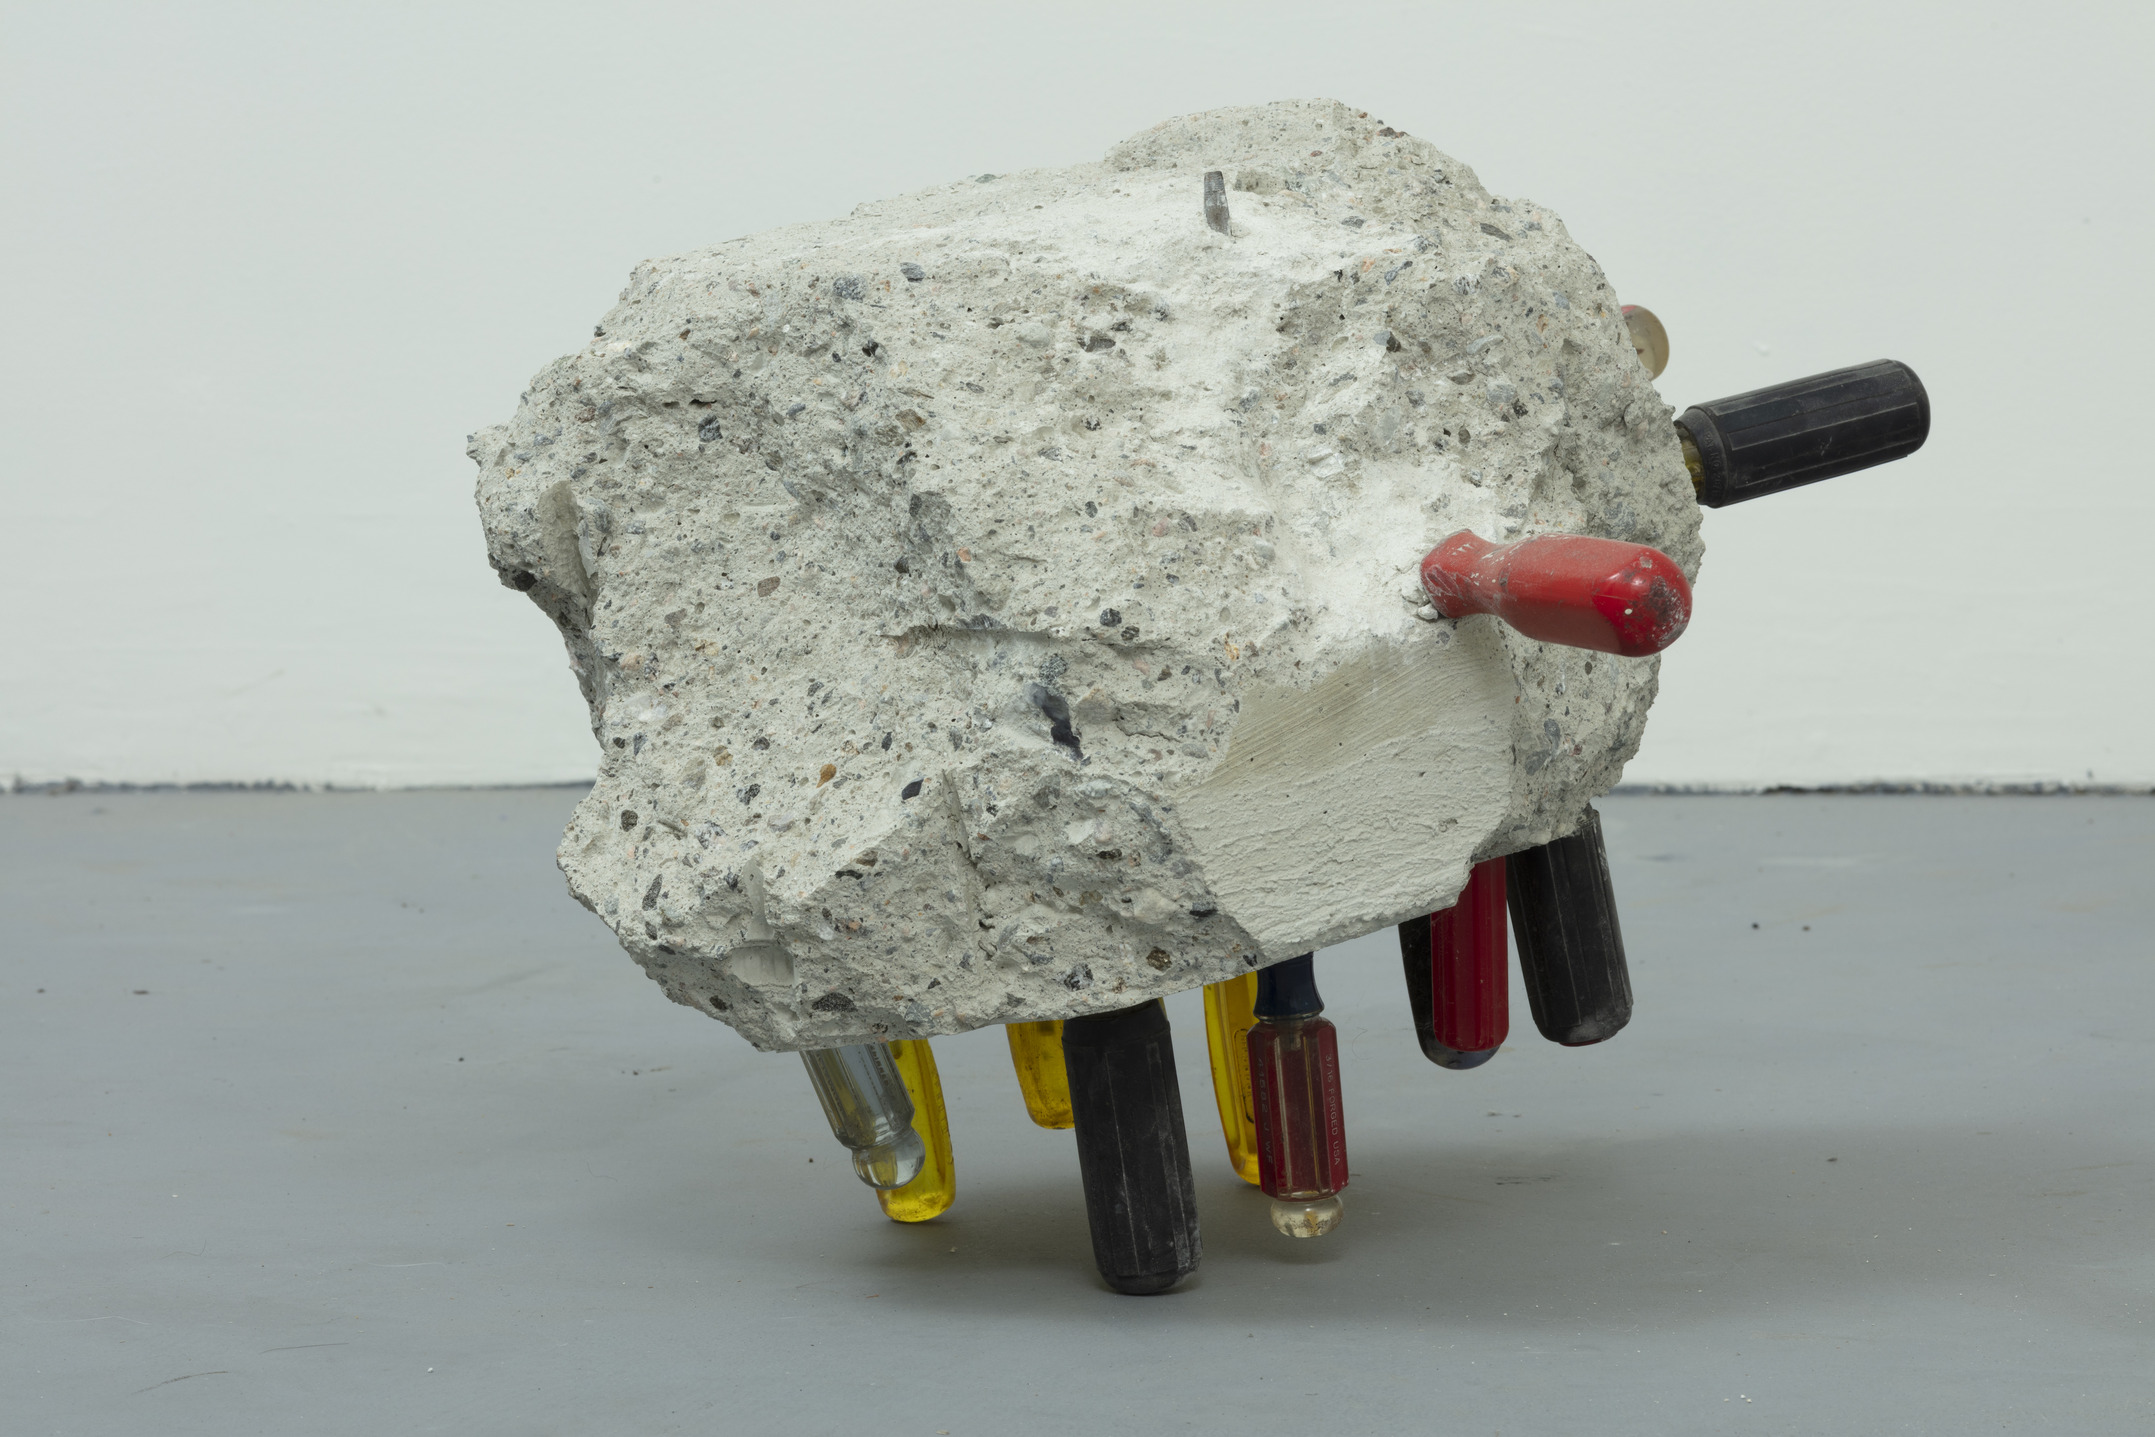 Eh Tu - A sculpture by Brian Dario, A large chunk of concrete, pierced at multiple angles by different screwdrivers, held up by the screwdrivers piercing it from the bottom